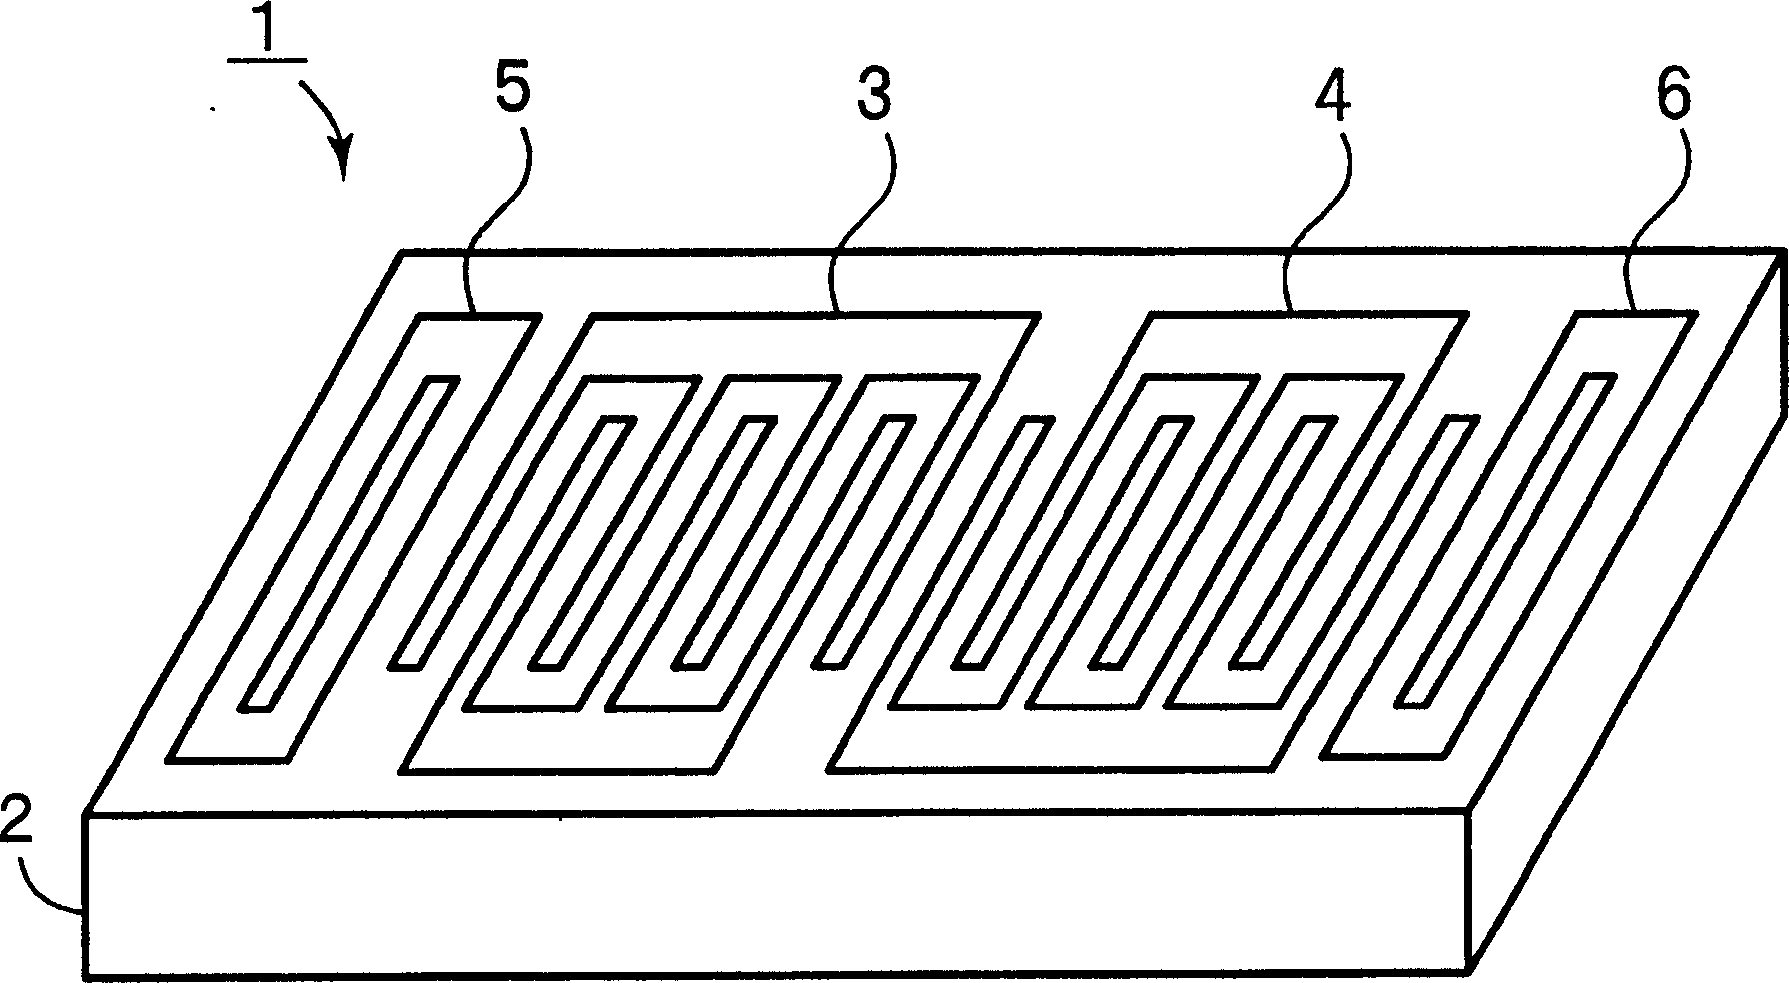 Elastic surface-wave device